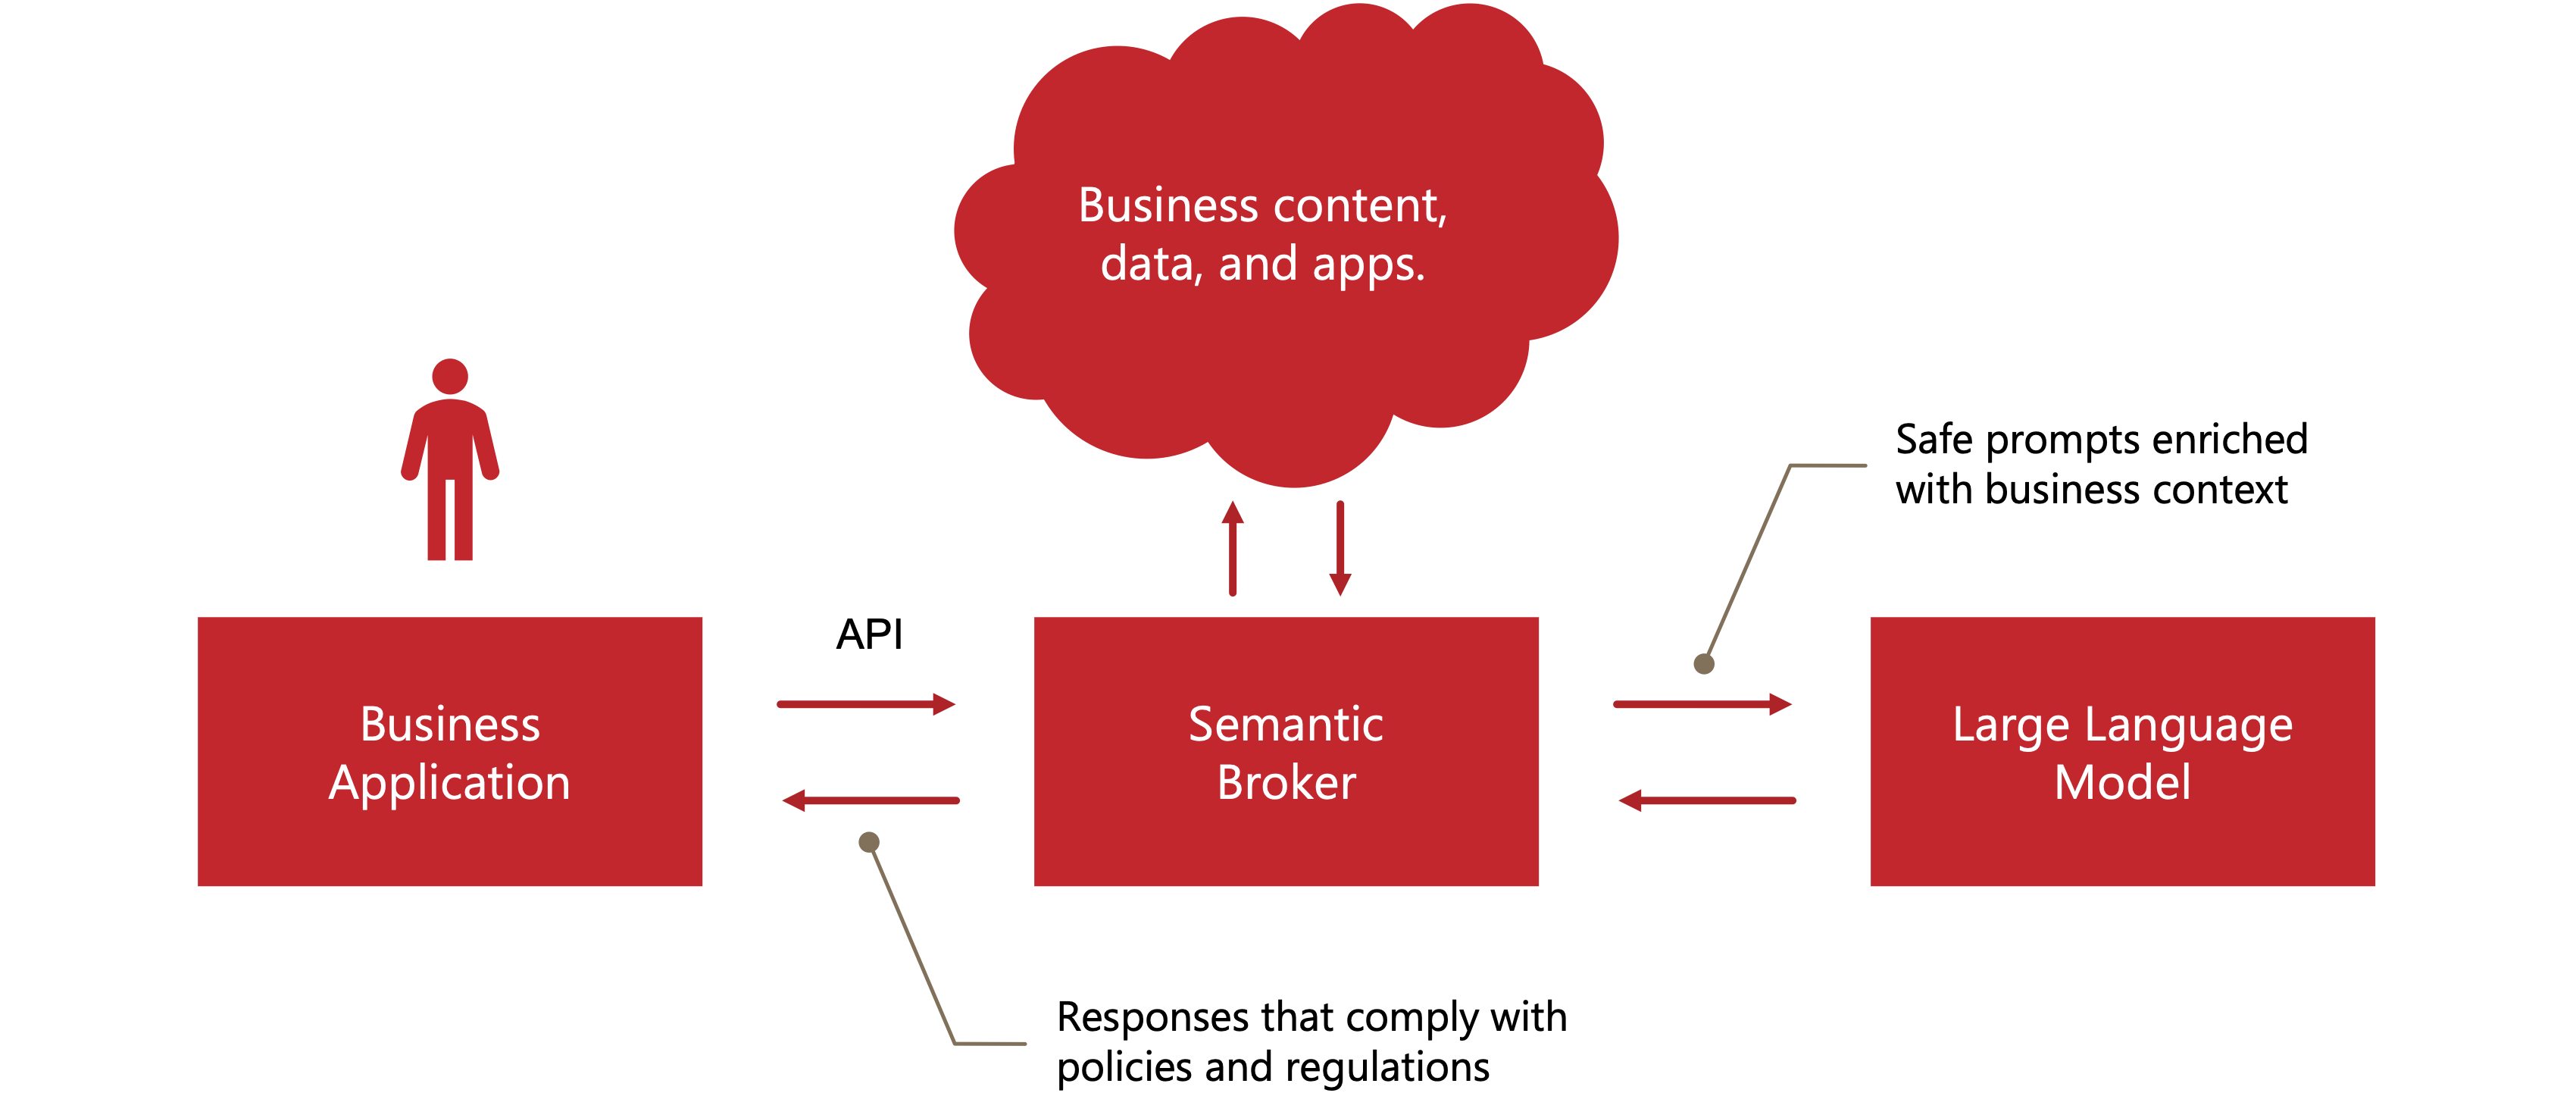 Semantic Brokers - A New Class of AI Software